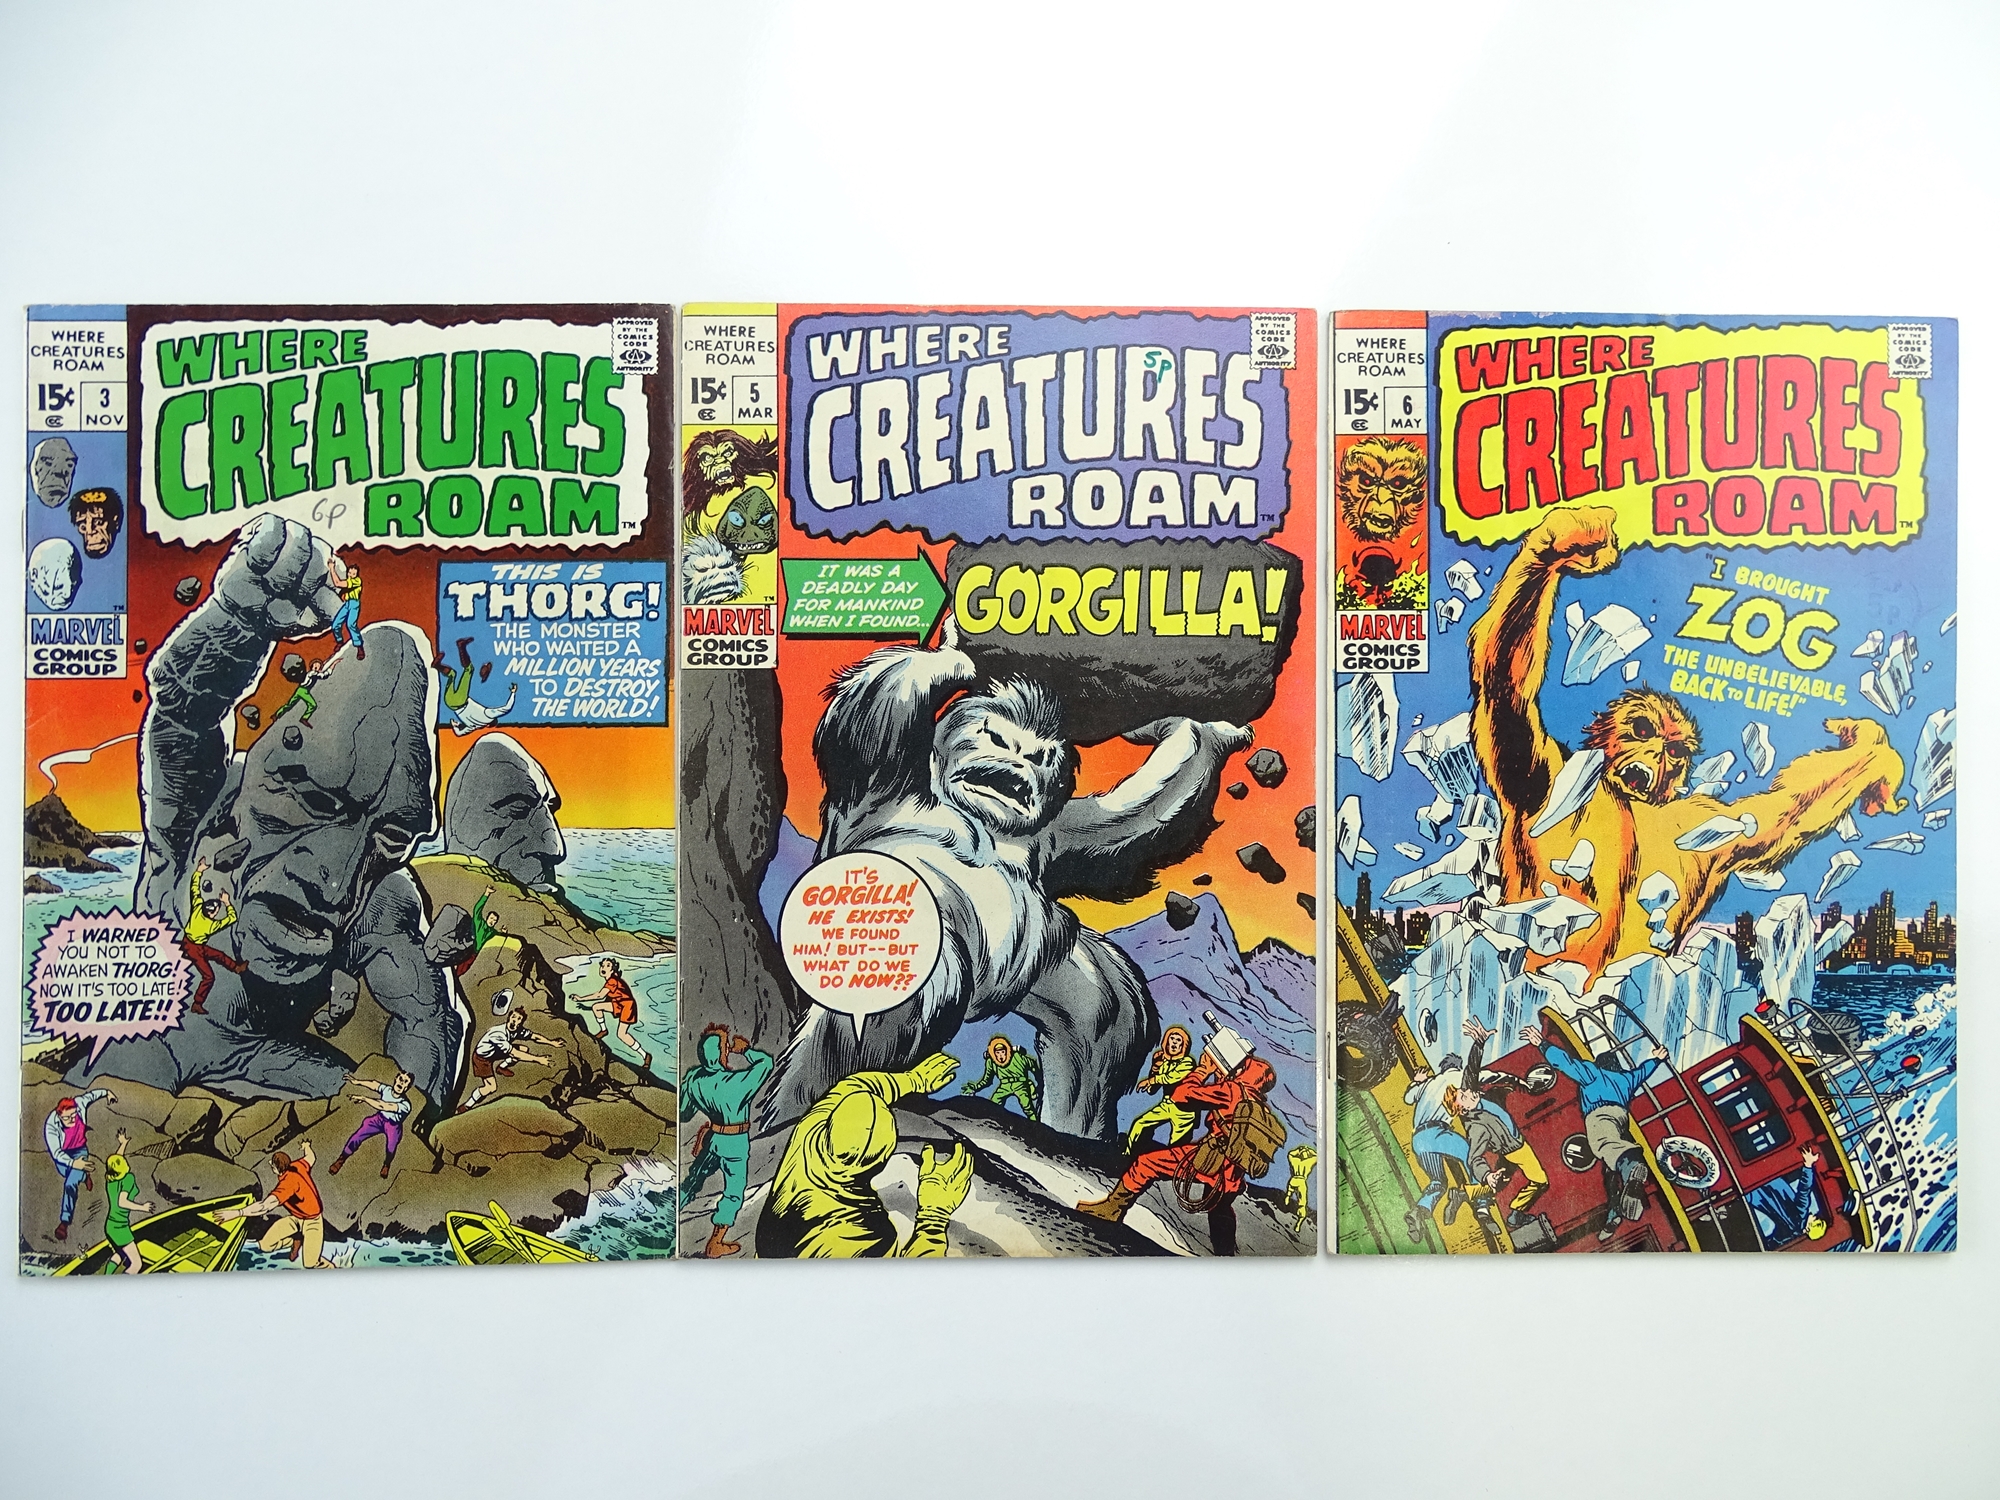 WHERE CREATURES ROAM # 3, 5, 6 (Group of 3) - (1969 - MARVEL - Cents Copy) - Jack Kirby, Don Heck,